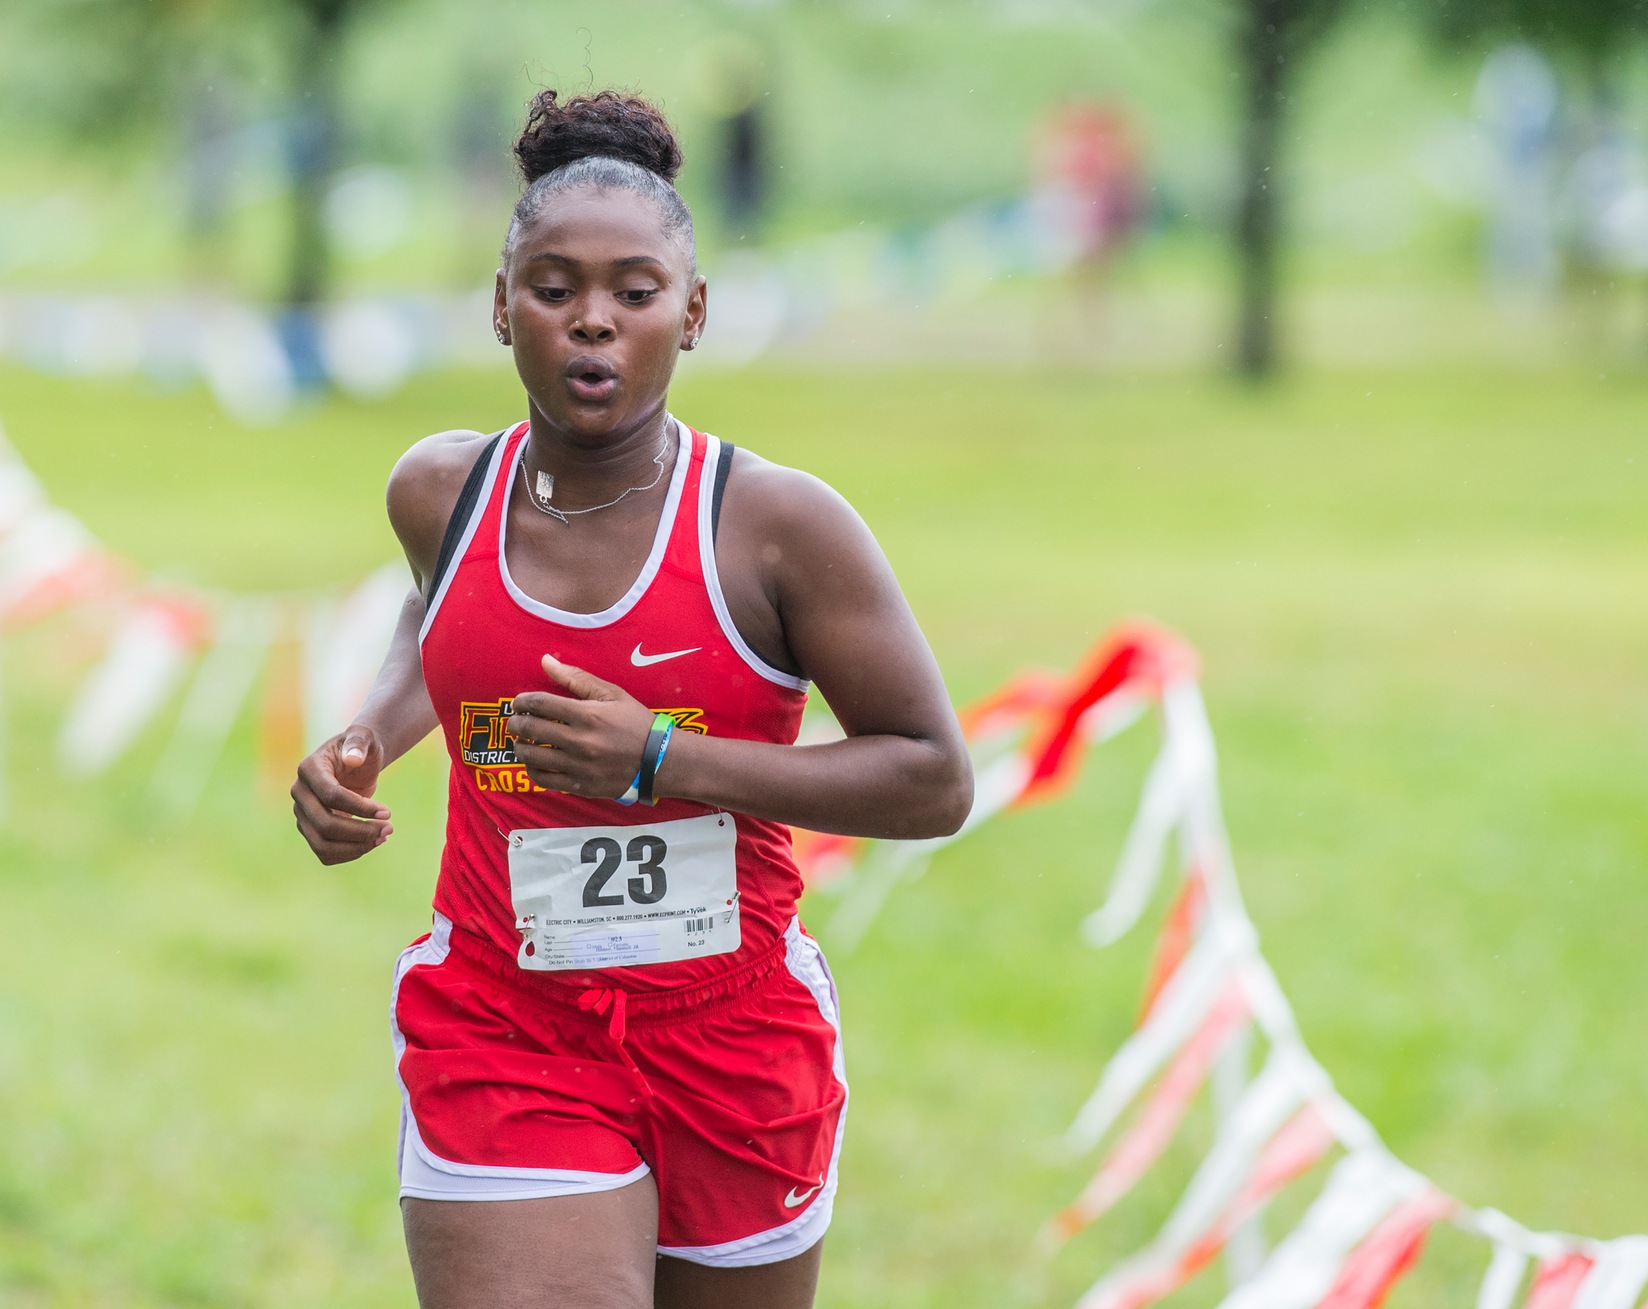 Firebirds Compete at Eastern Shore Cross Country Invitational